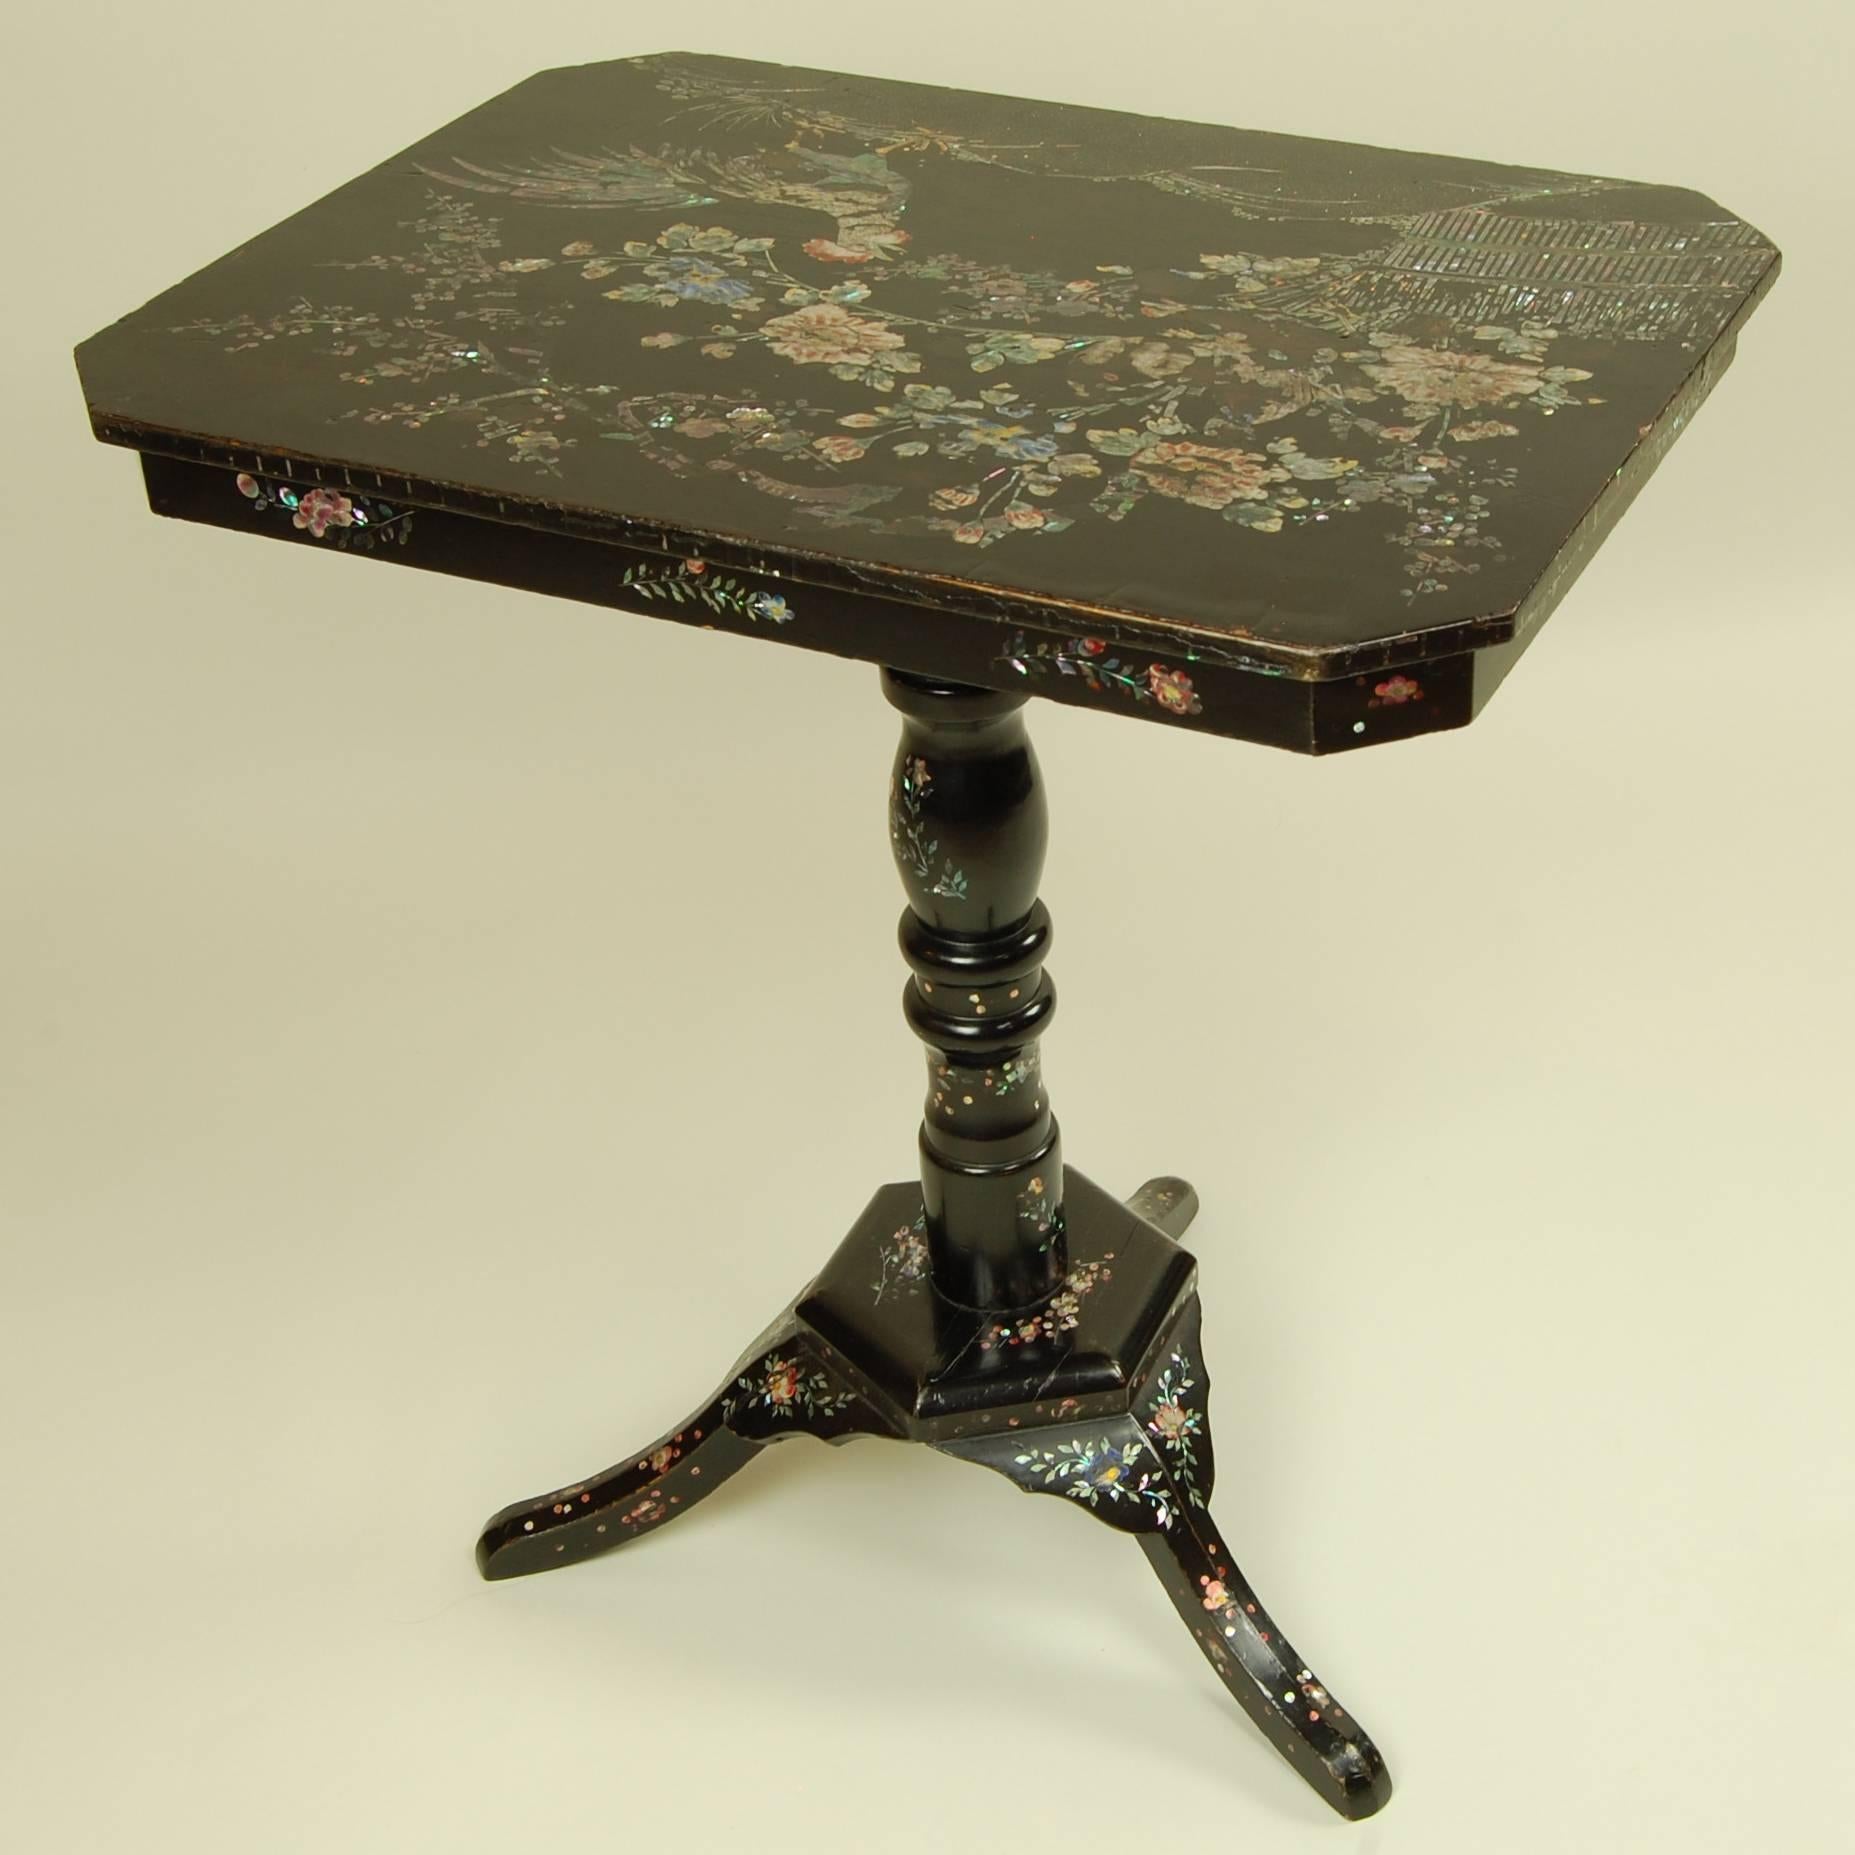 Crafted with painstaking attention to detail, this small wooden table would be a conversation starter in any era. Its ebony finish is studded with thousands of select mother-of-pearl fragments, all artfully arranged to form an extraordinary,